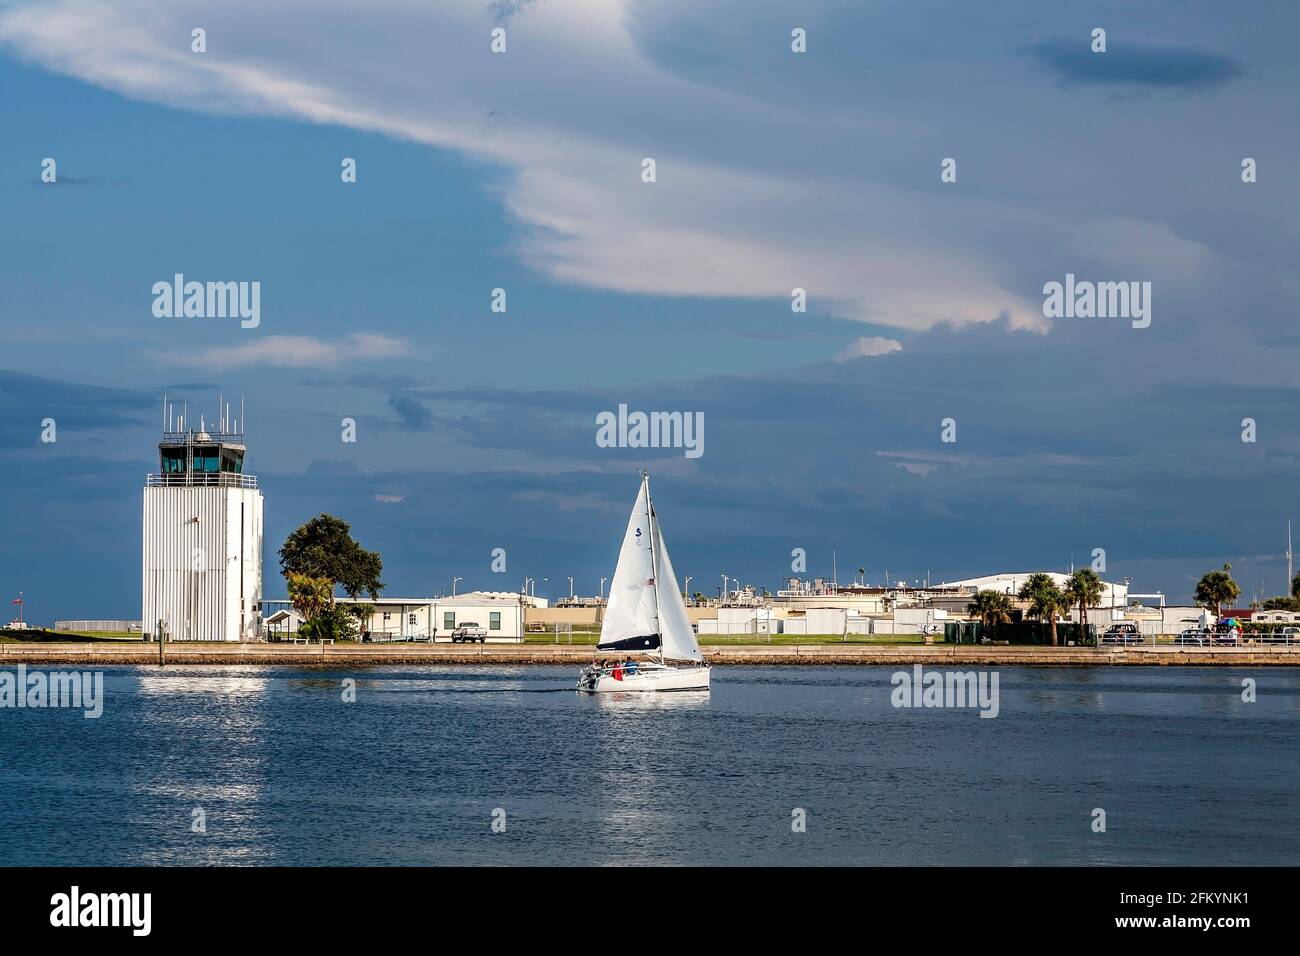 Control tower at Albert Whittled Airport with sailboat in foreground on Tampa Bay. Saint Petersburg, Florida Stock Photo